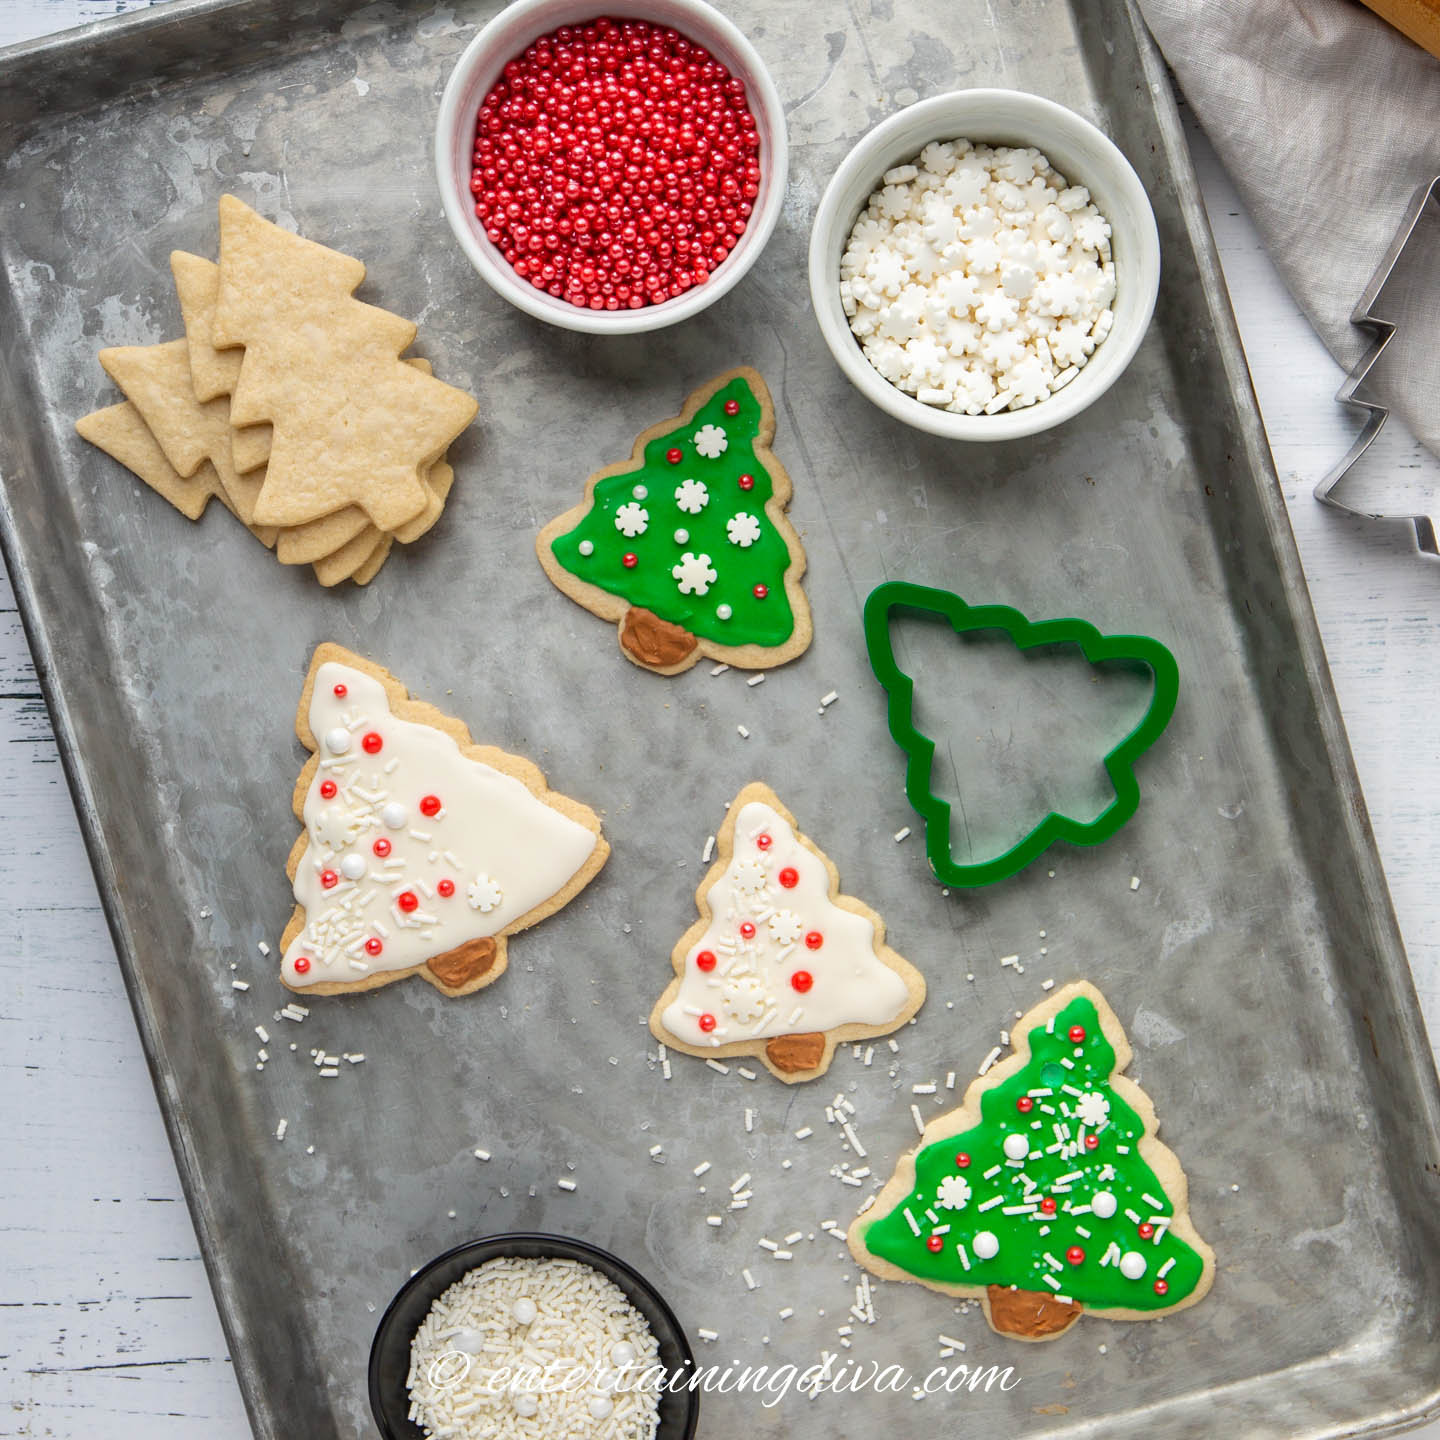 Three different Christmas tree sugar cookie designs on a baking sheet.